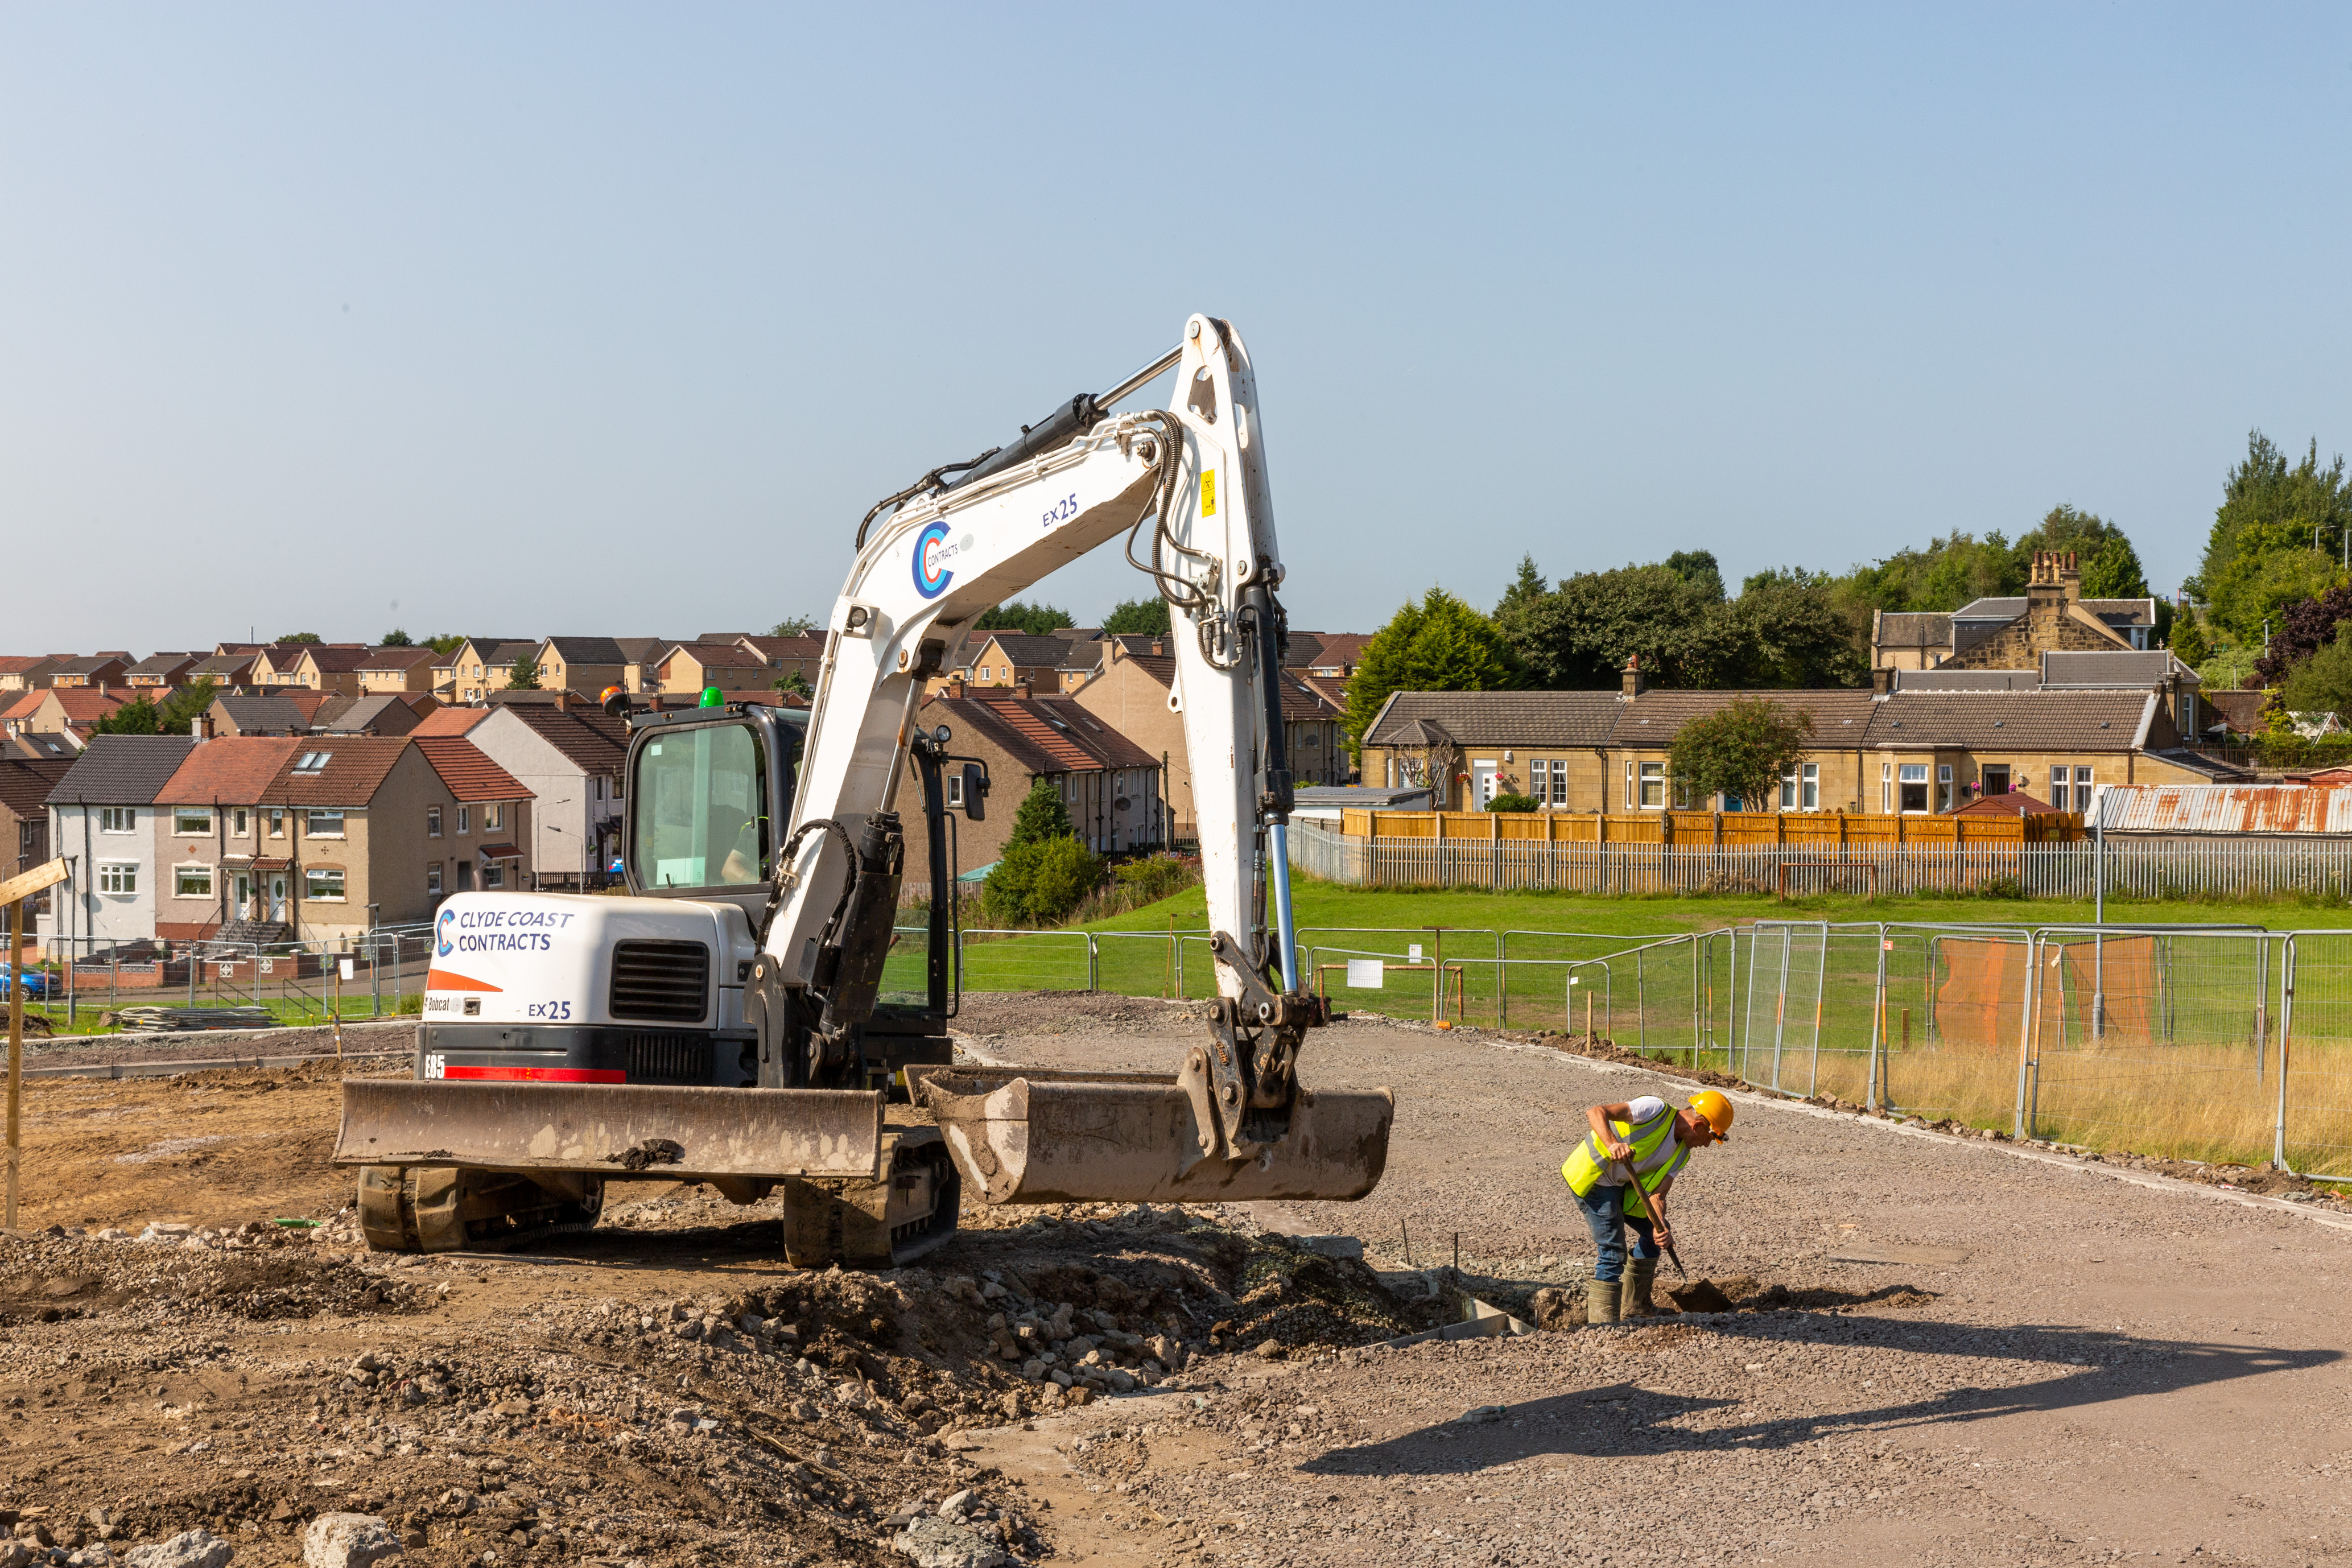 Contracts approved for new council homes in North Lanarkshire